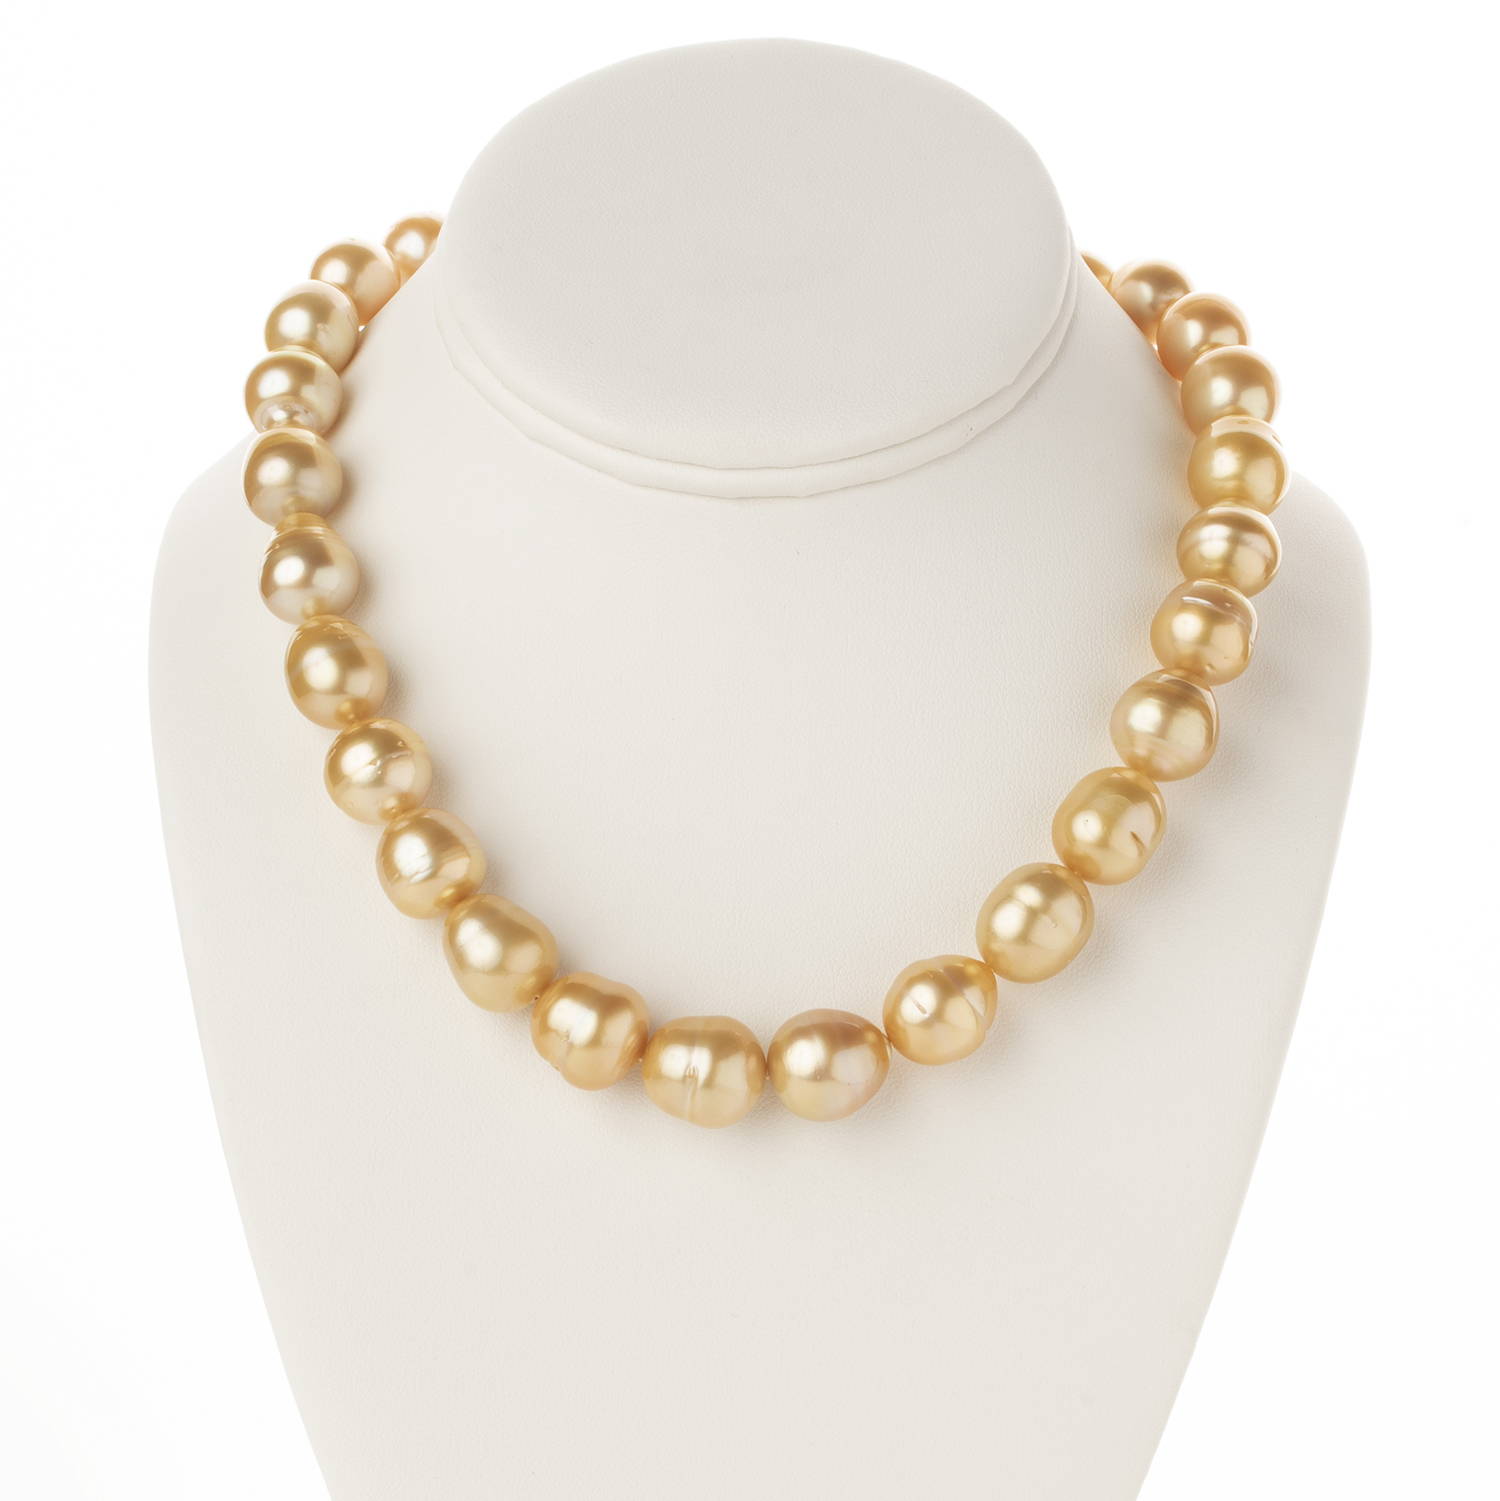 Golden South Sea Pearl Necklace on Jewelry Bust